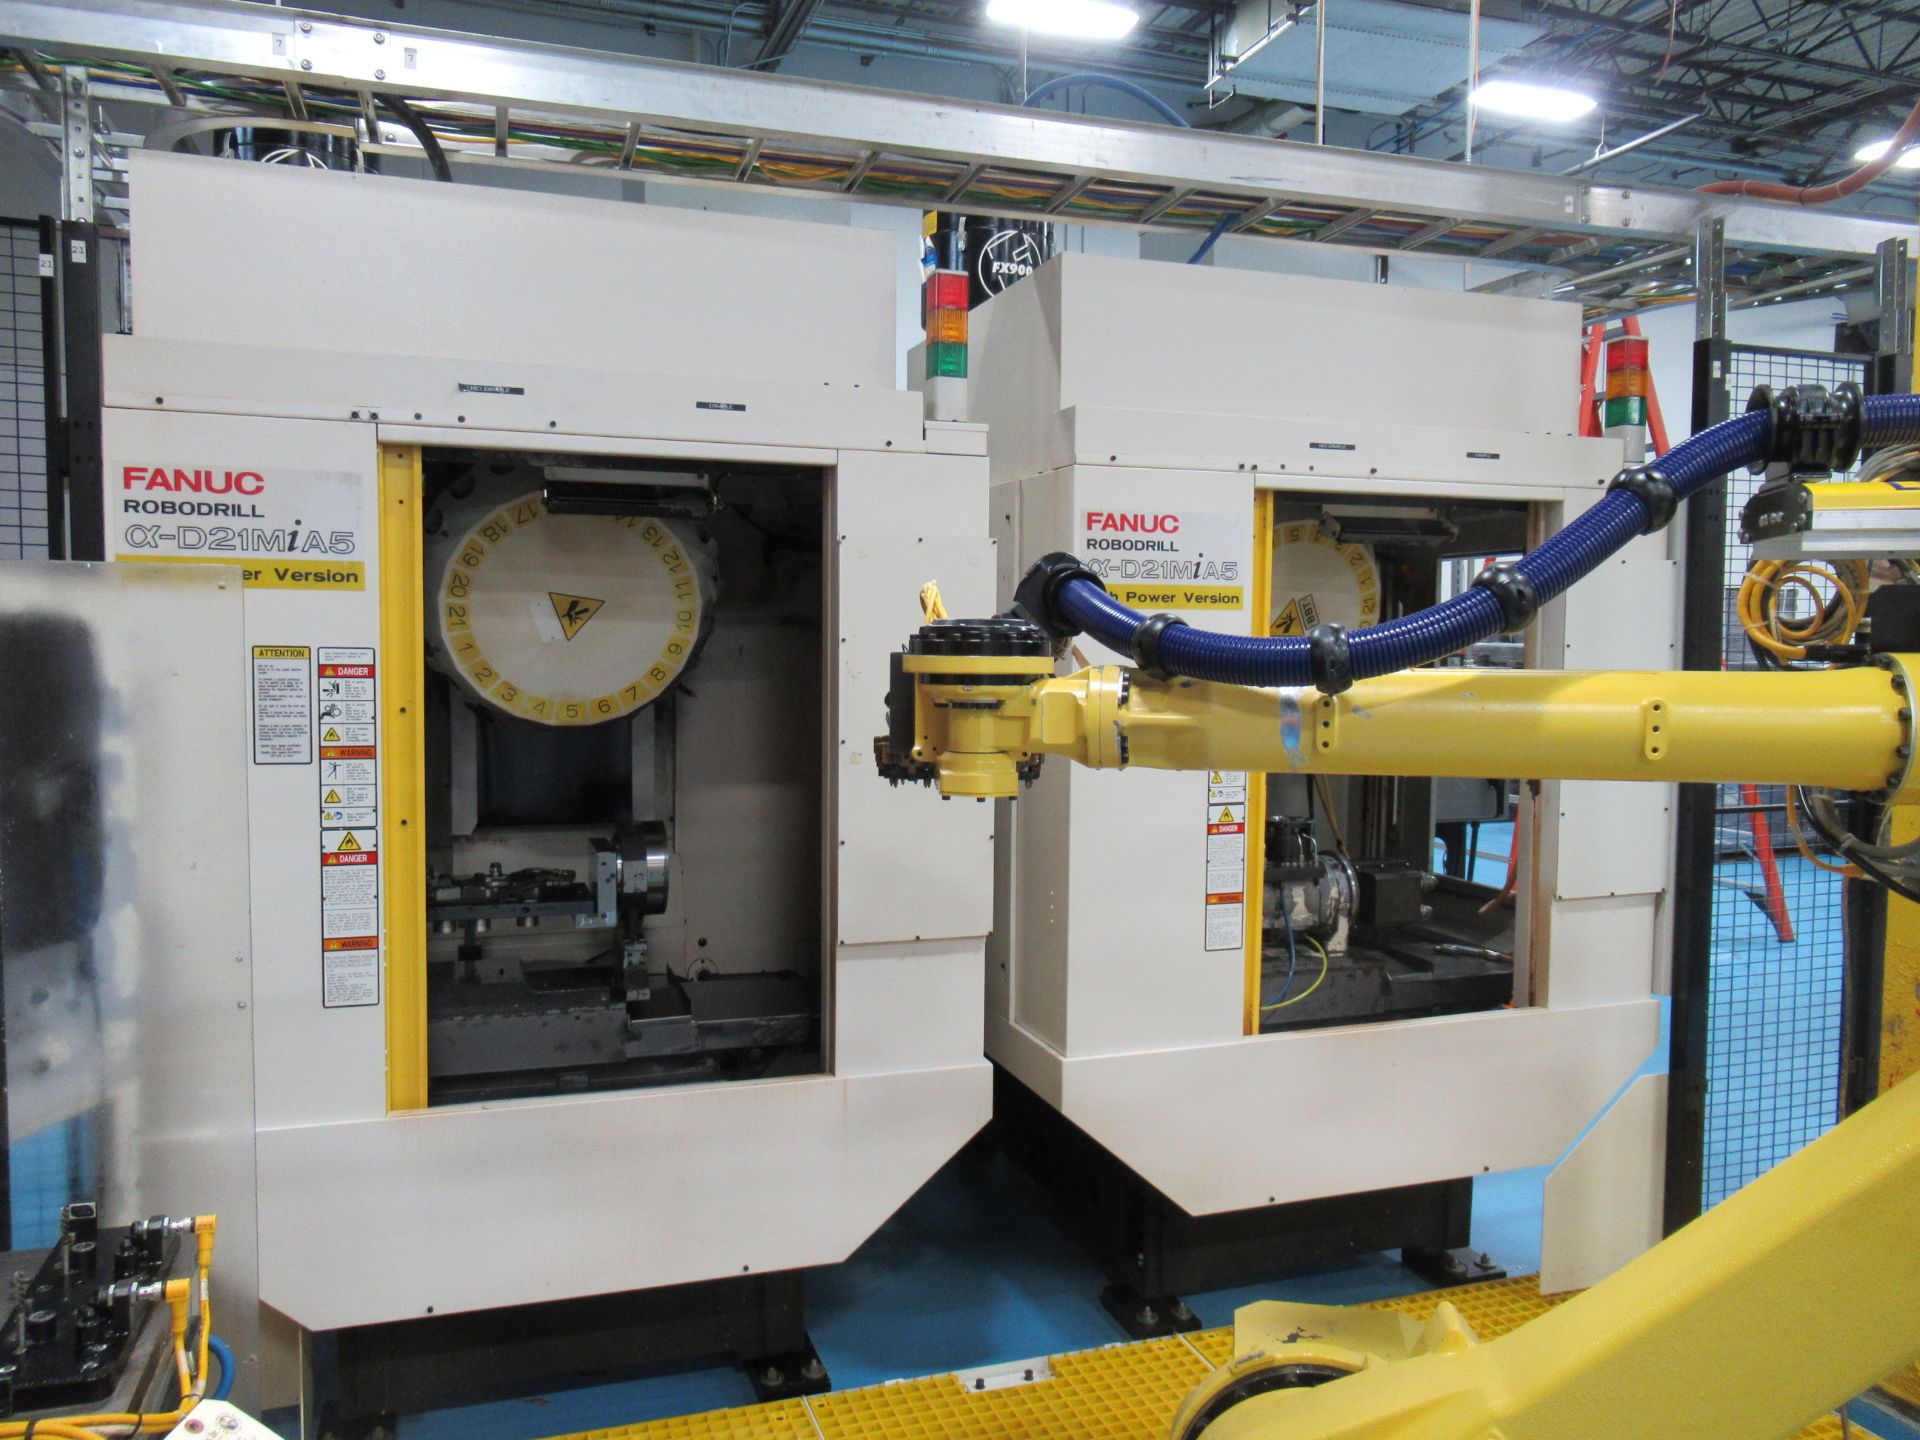 2017 (2) FANUC ROBODRILL α-D21MiA5 “High Power Version” CNC Milling & Drilling Centers